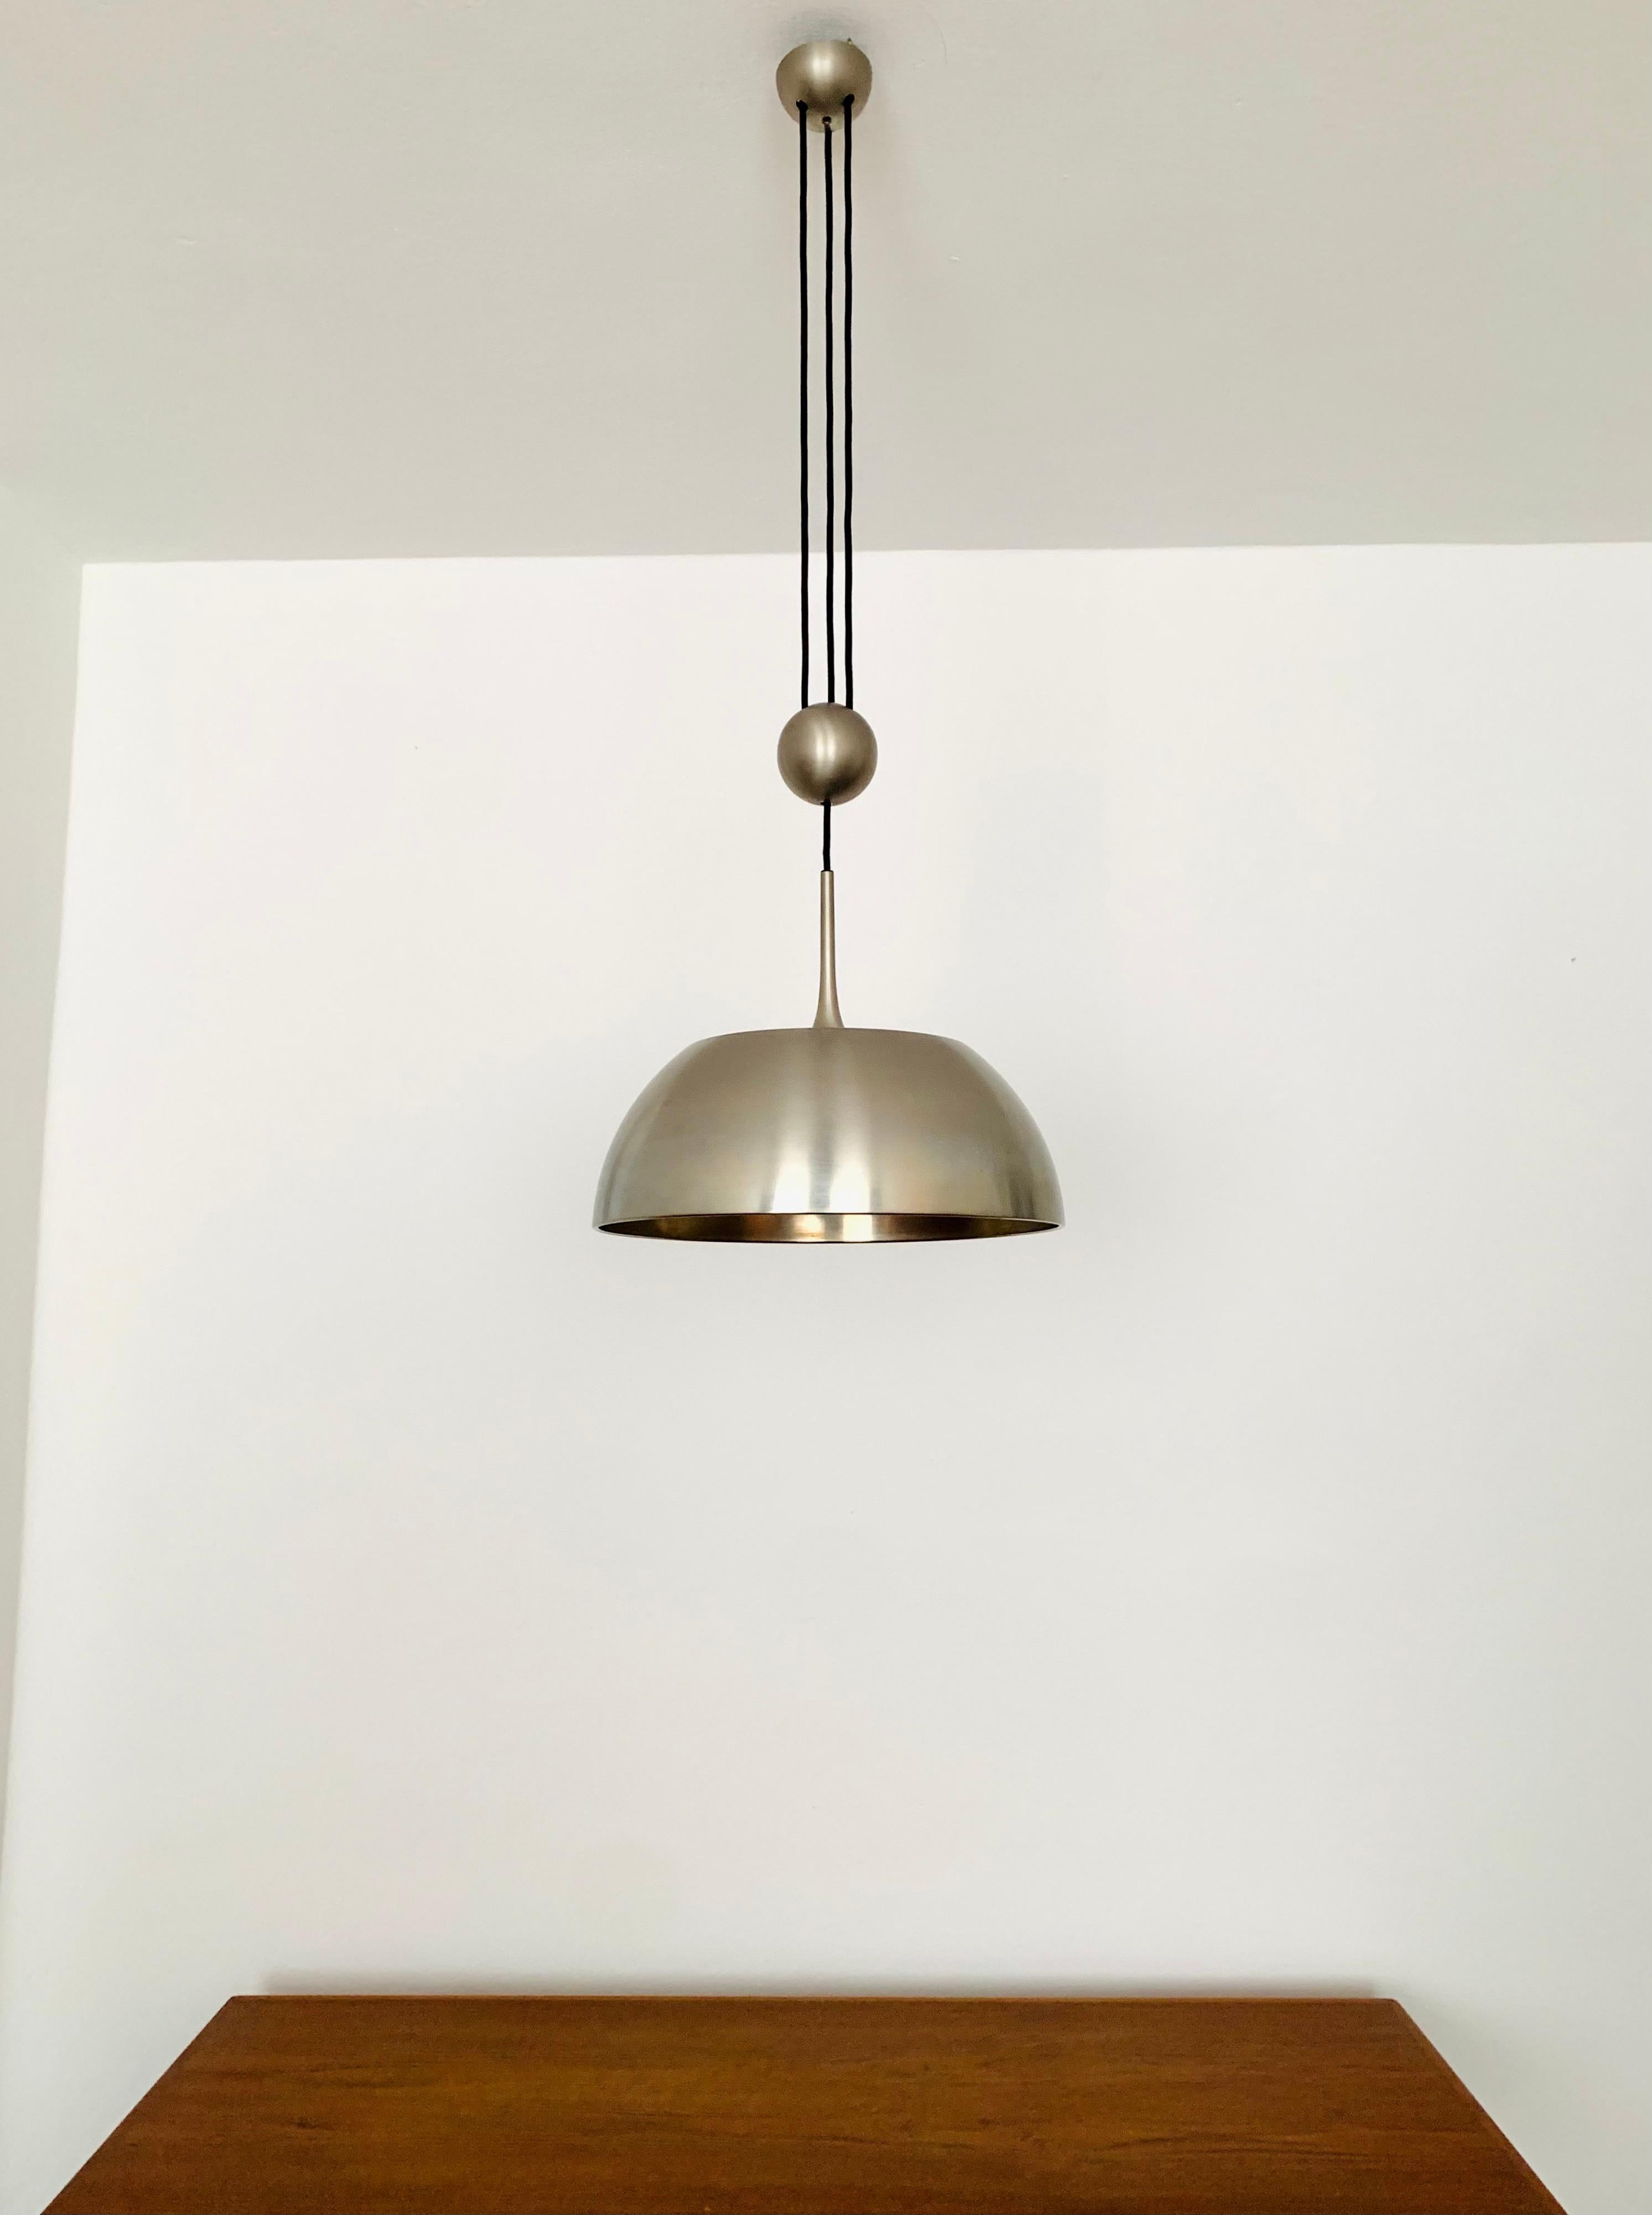 Late 20th Century Adjustable Pendant Lamp with Counterweight by Florian Schulz For Sale